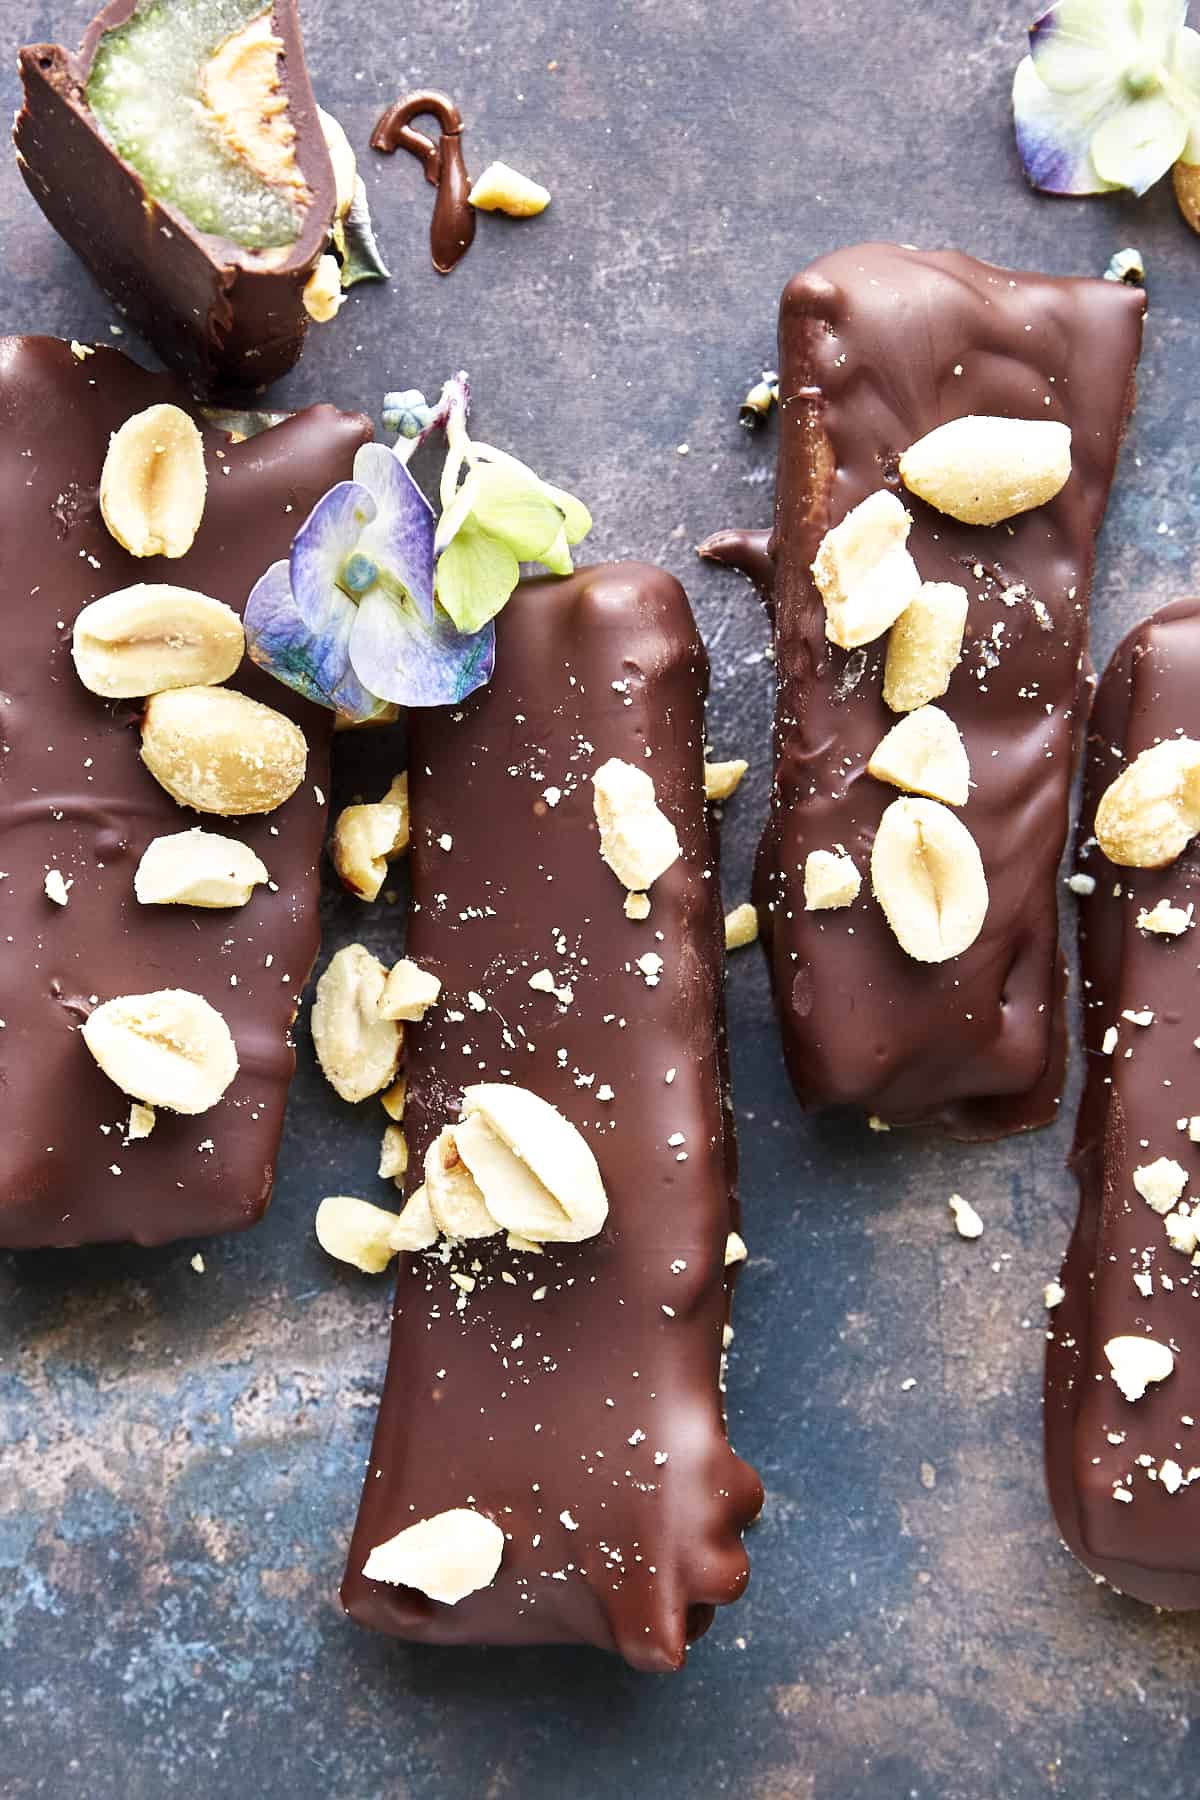 Four full-sized chocolate celery and peanut butter logs topped with peanuts and sea salt and a fifth log with a bite missing. 